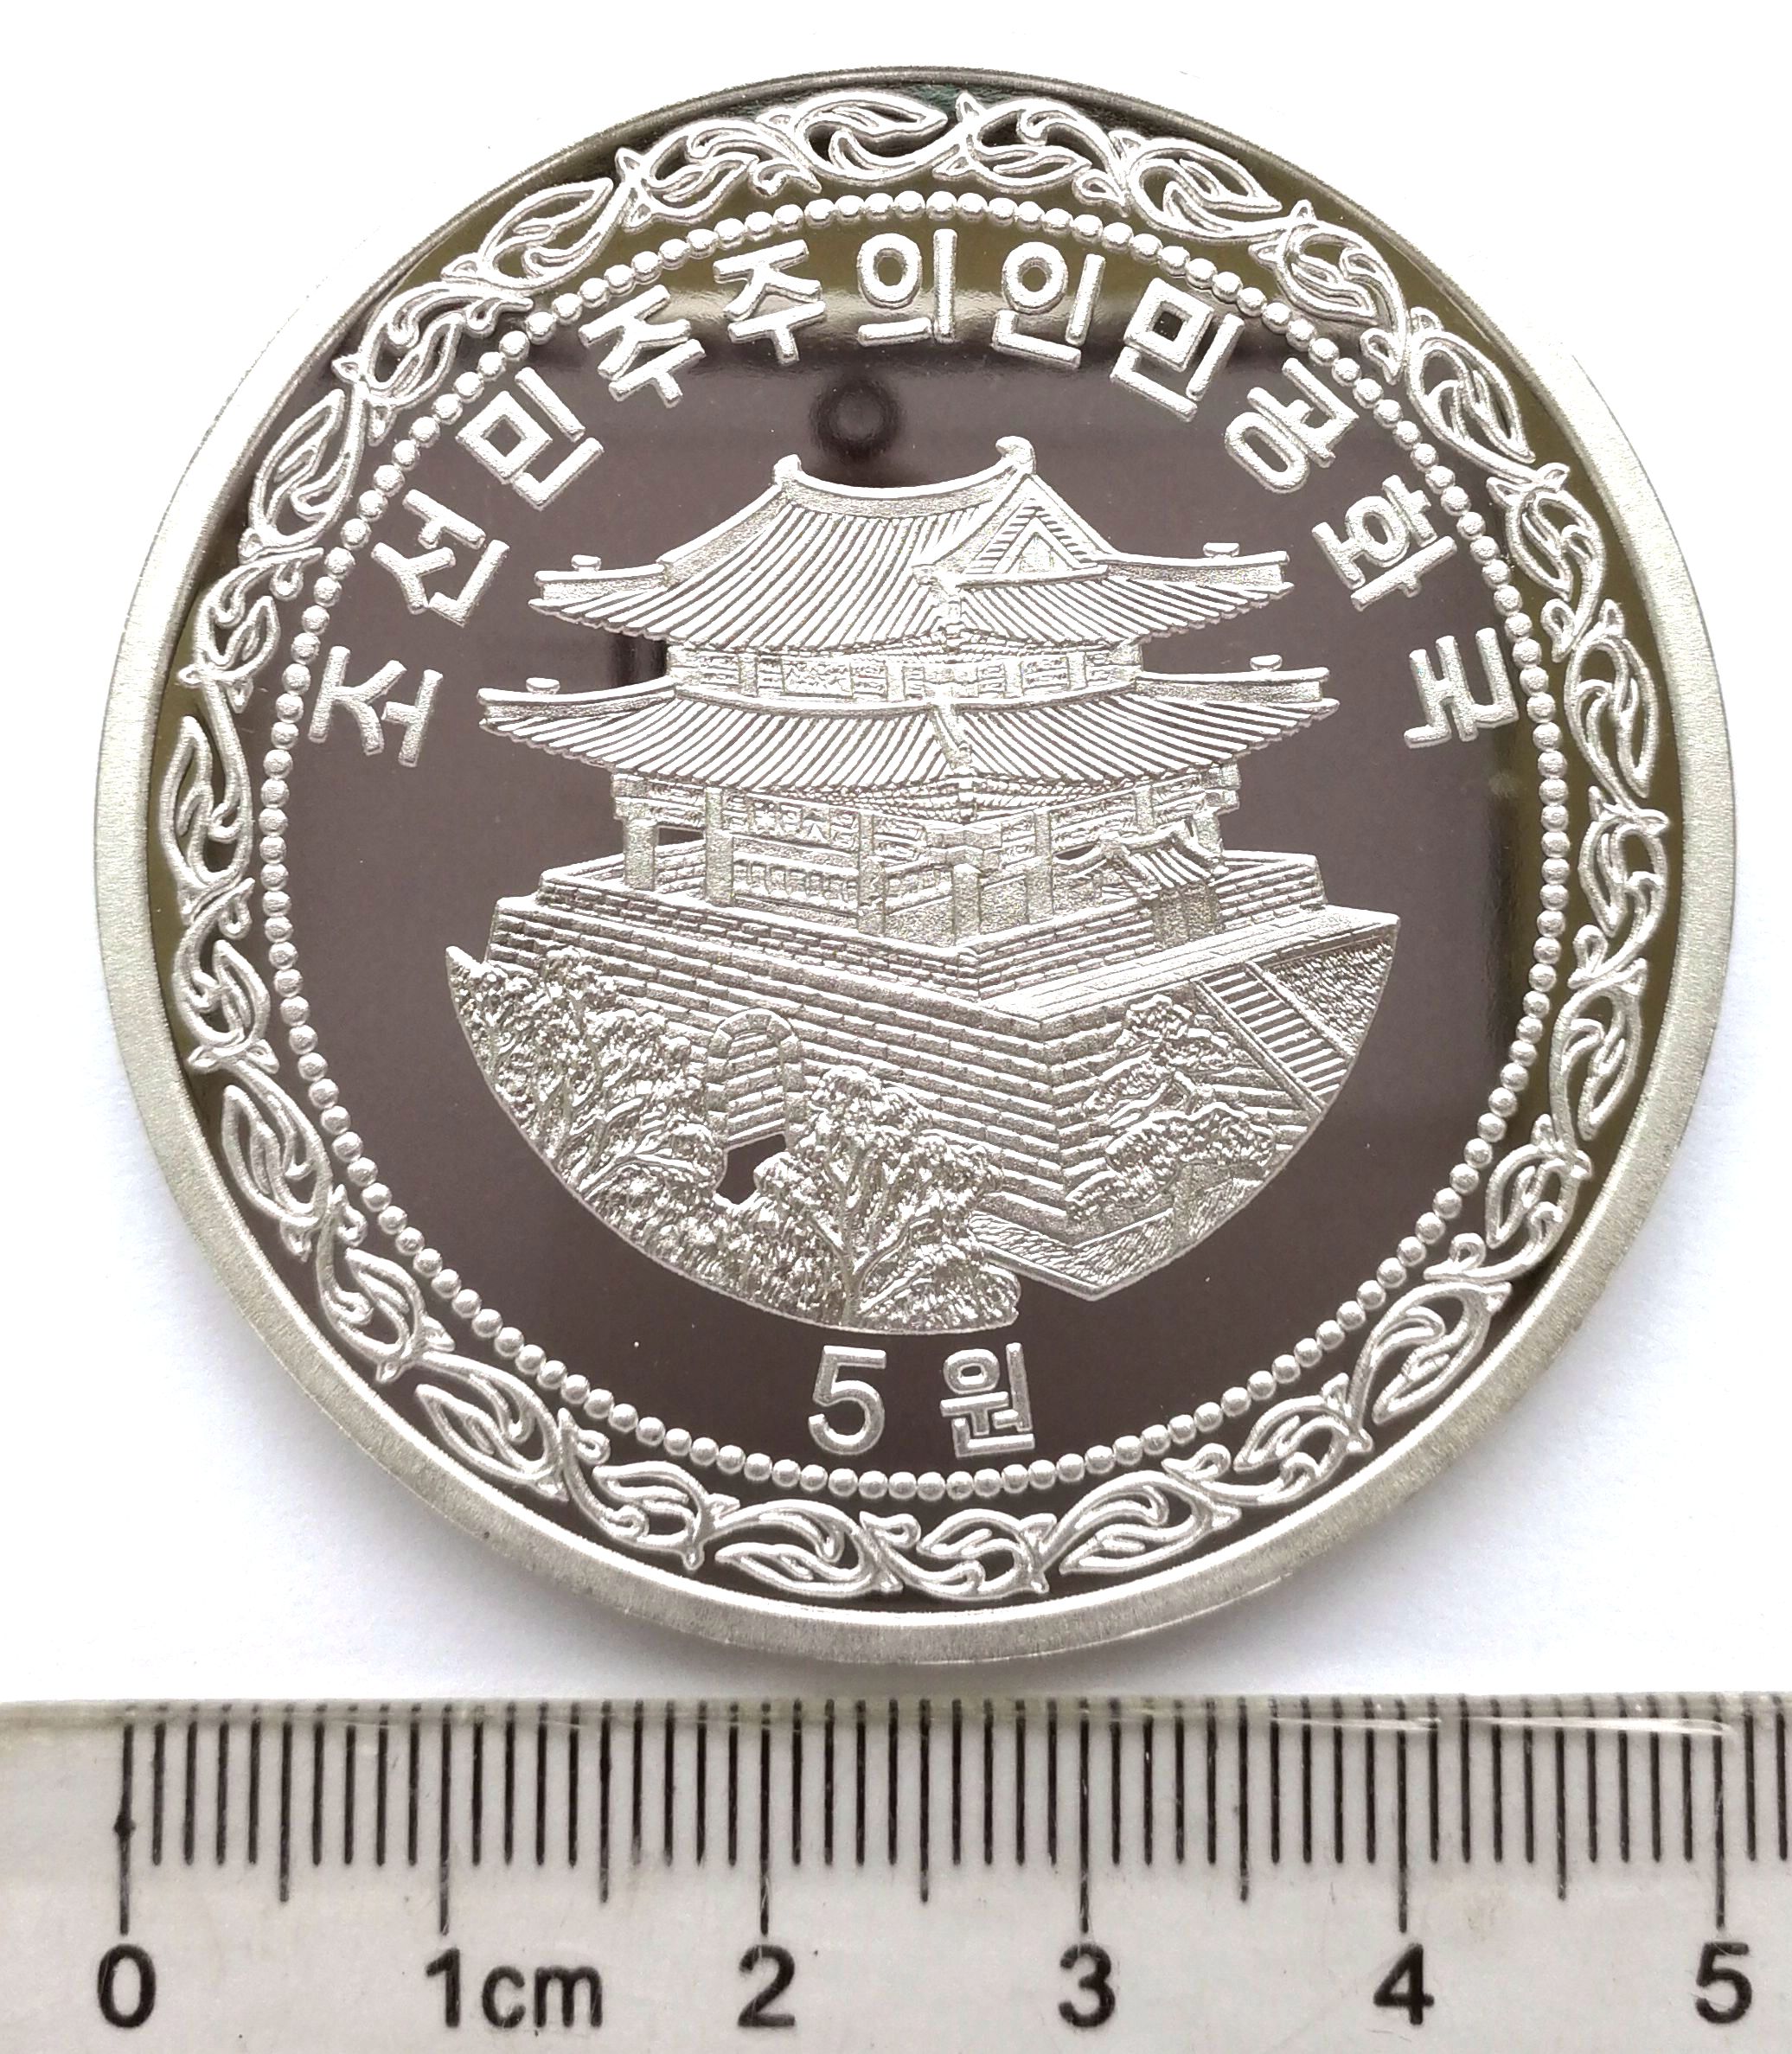 L3268, Korea "Destroy the United Stated" Large Proof Coin, 2018 Alu, Rare